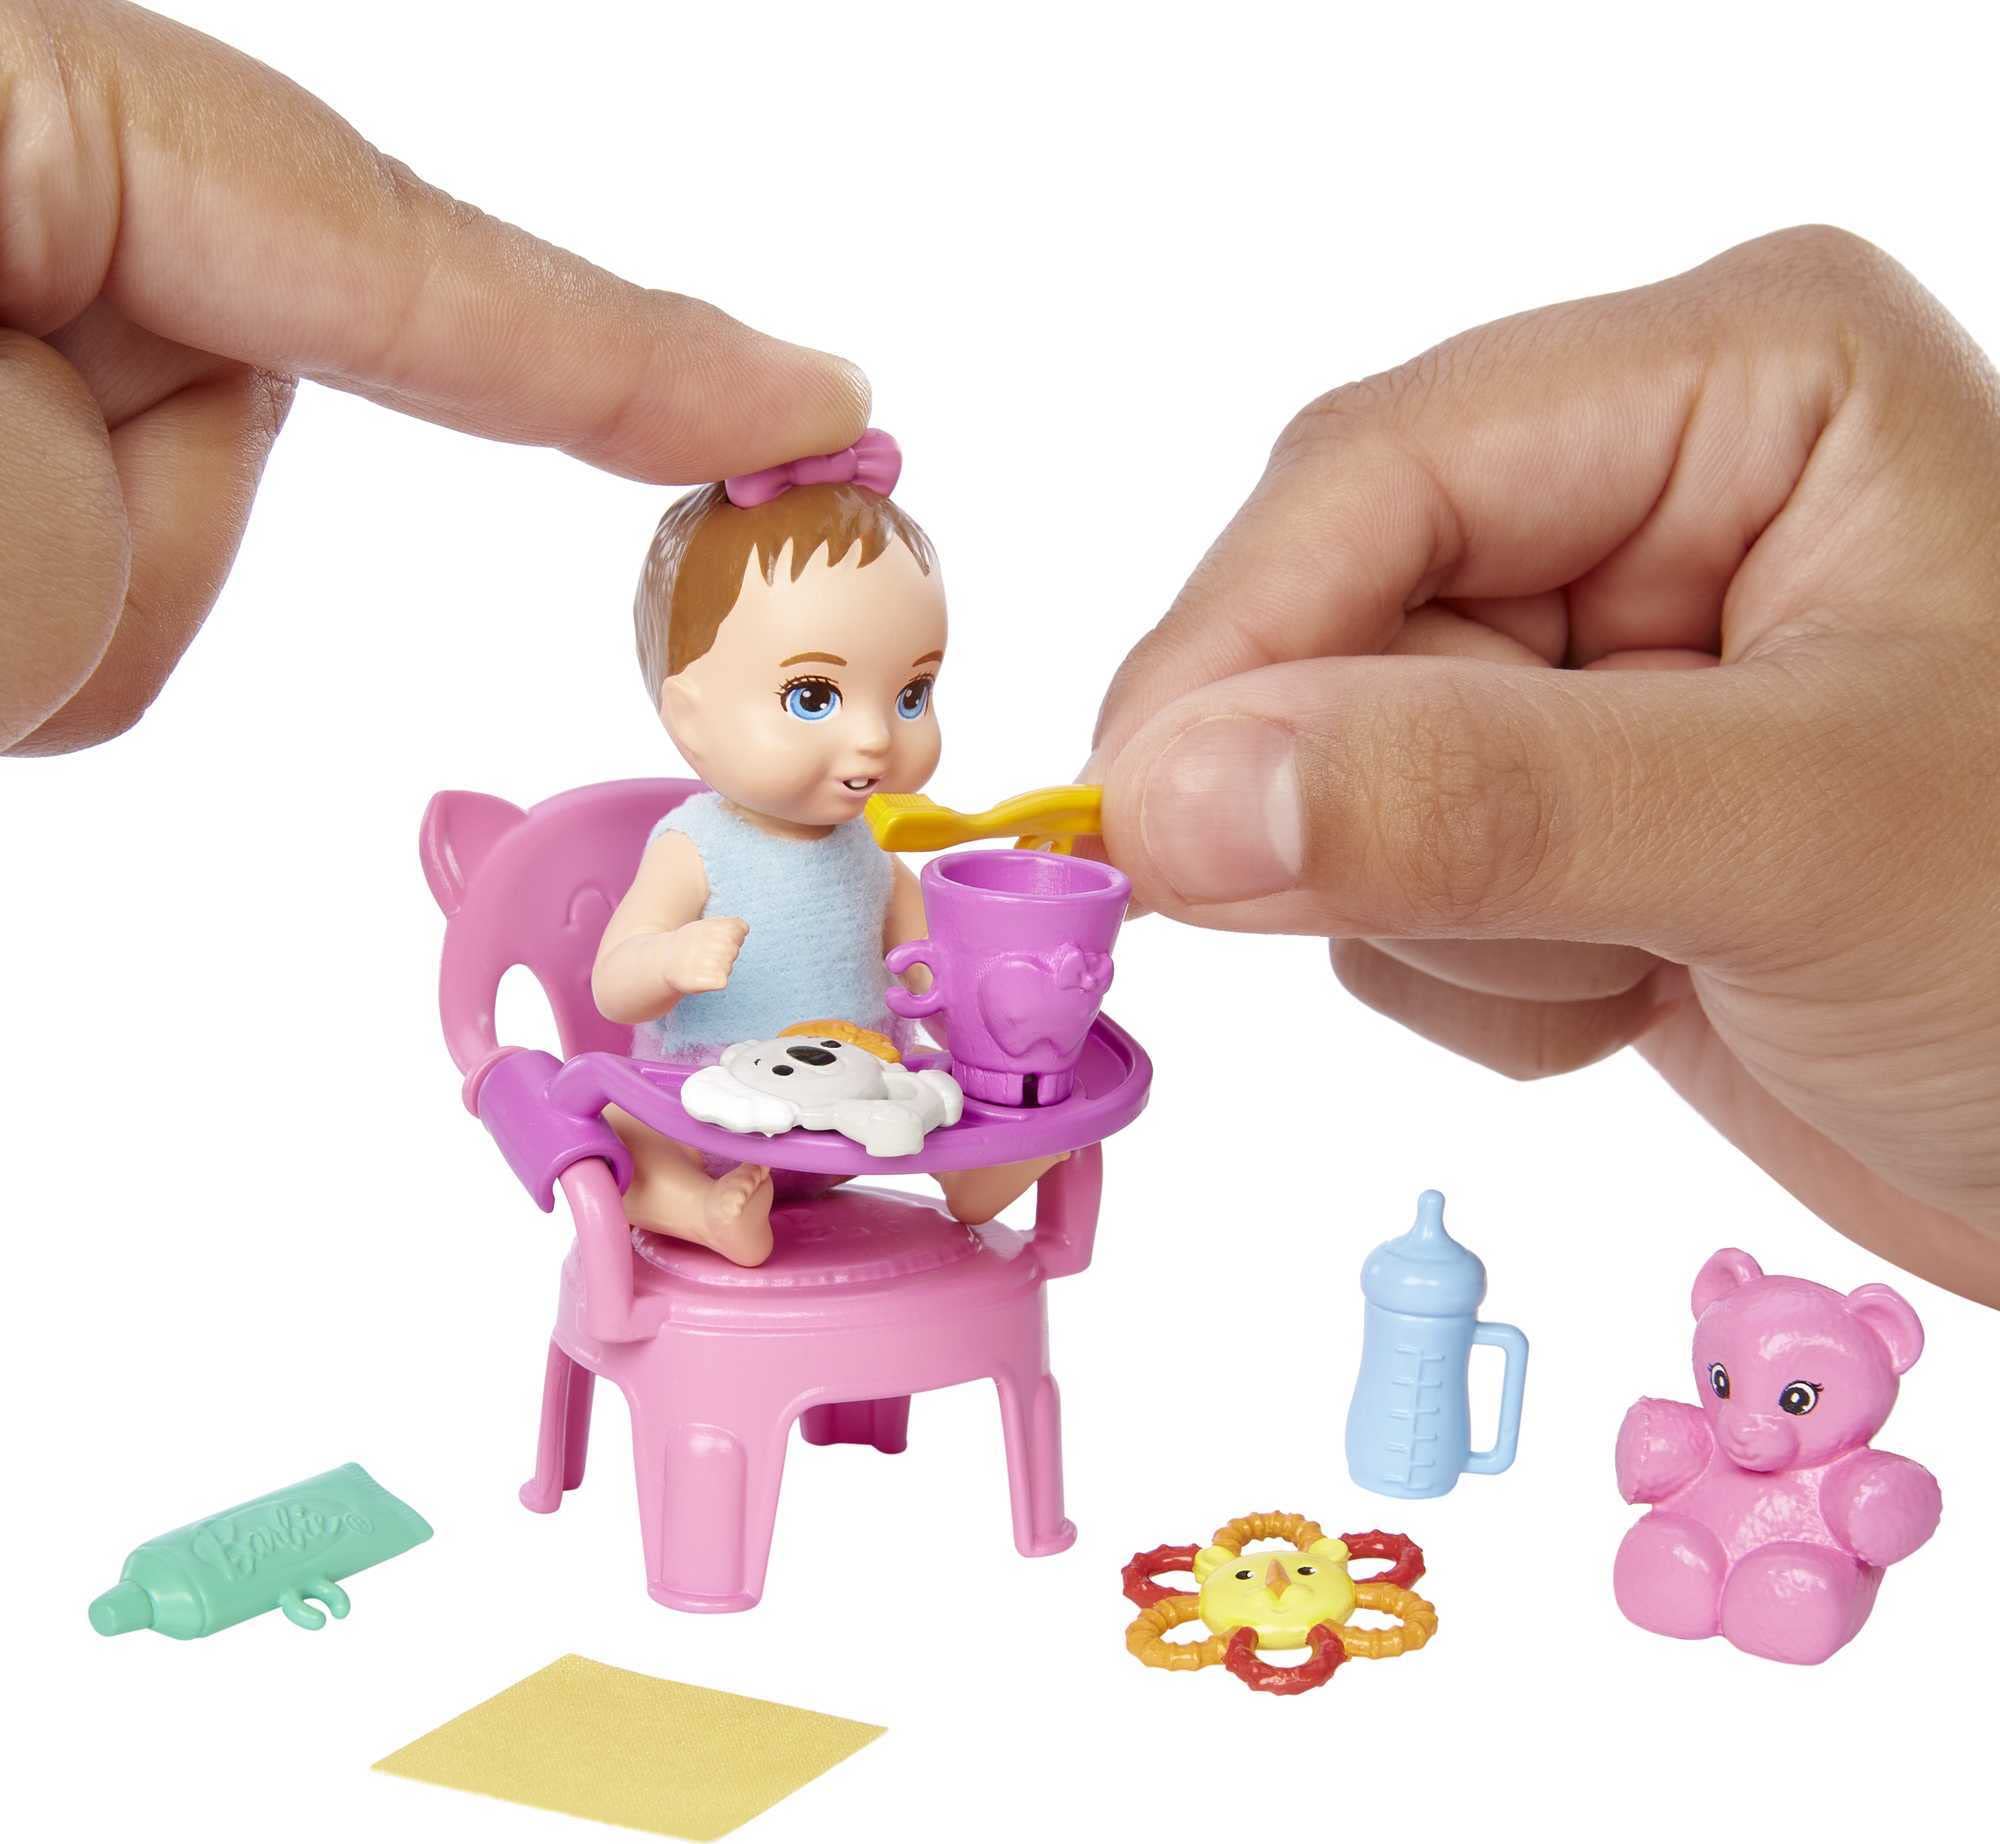 Barbie Skipper Babysitters Inc Baby Small Doll & Accessories, First Tooth Playset with Appearing & Disappearing Tooth